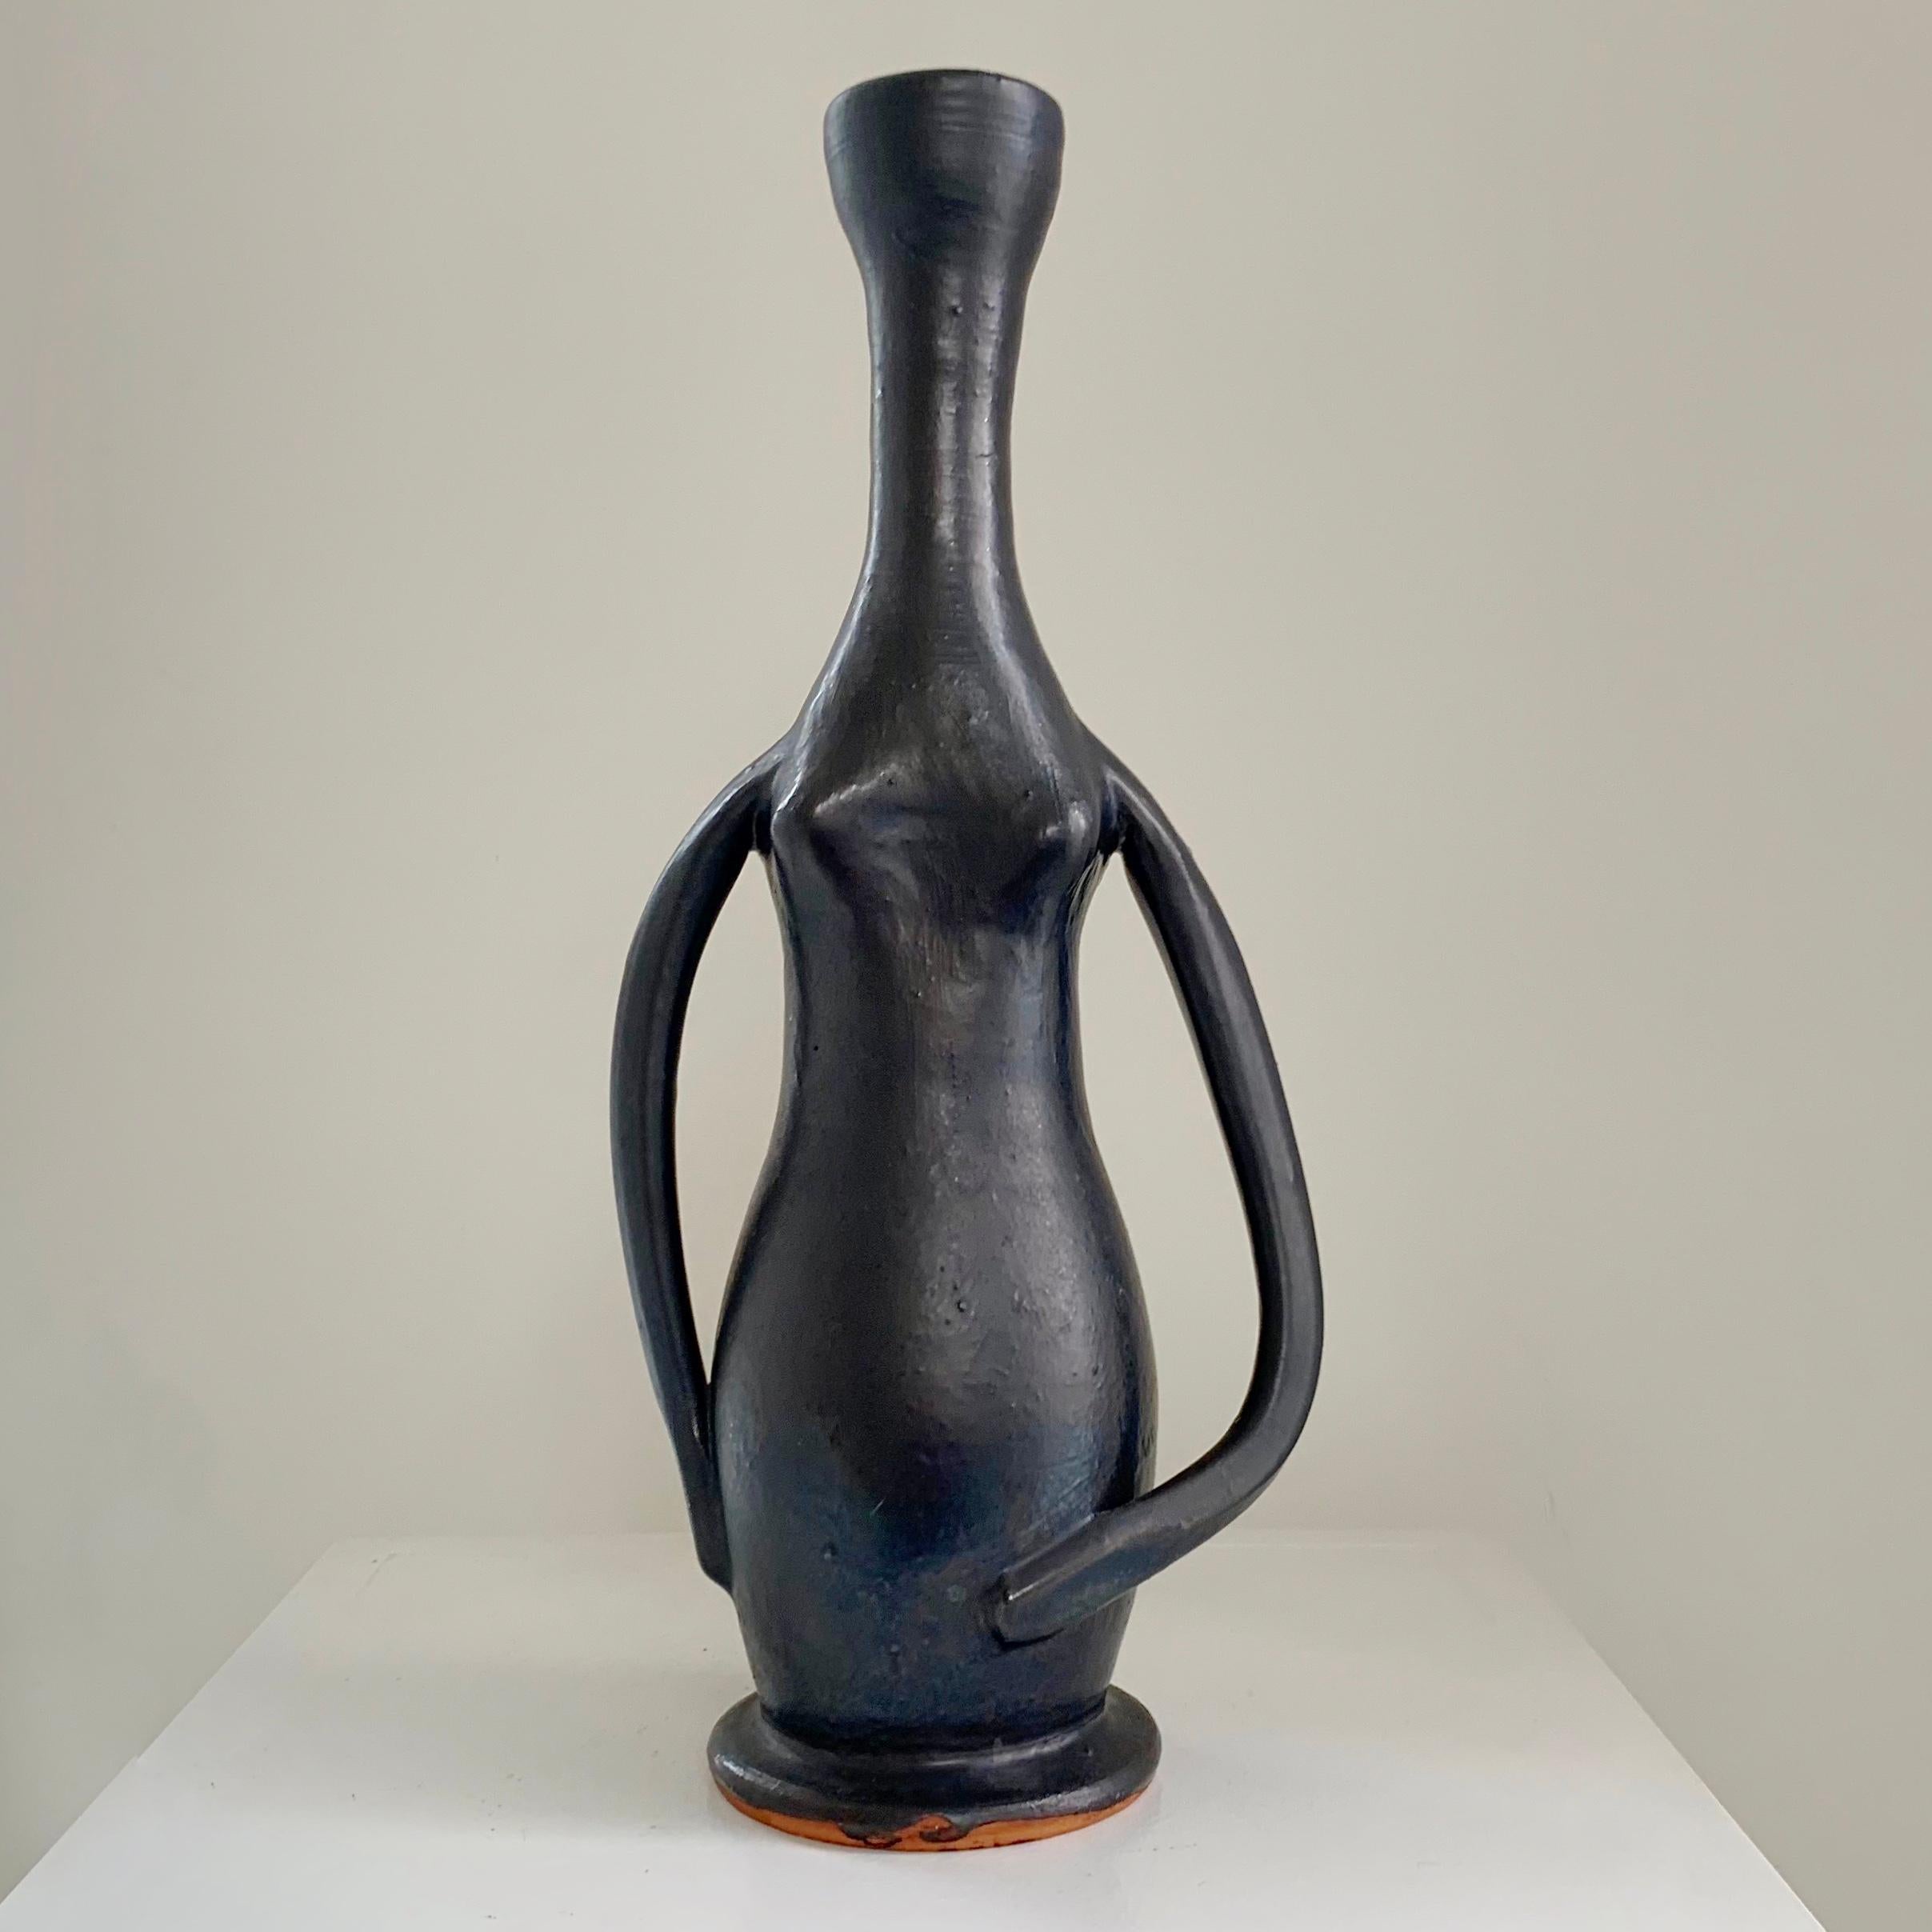 Nice Guillaume Met De Penninghen antropomorphic vase, circa 1950, France.
Black enameled sandstone.
Dimensions: 32 cm H, 14 cm W, 8 cm D.
Rare ceramic in good original condition.
All purchases are covered by our Buyer Protection Guarantee.
This item